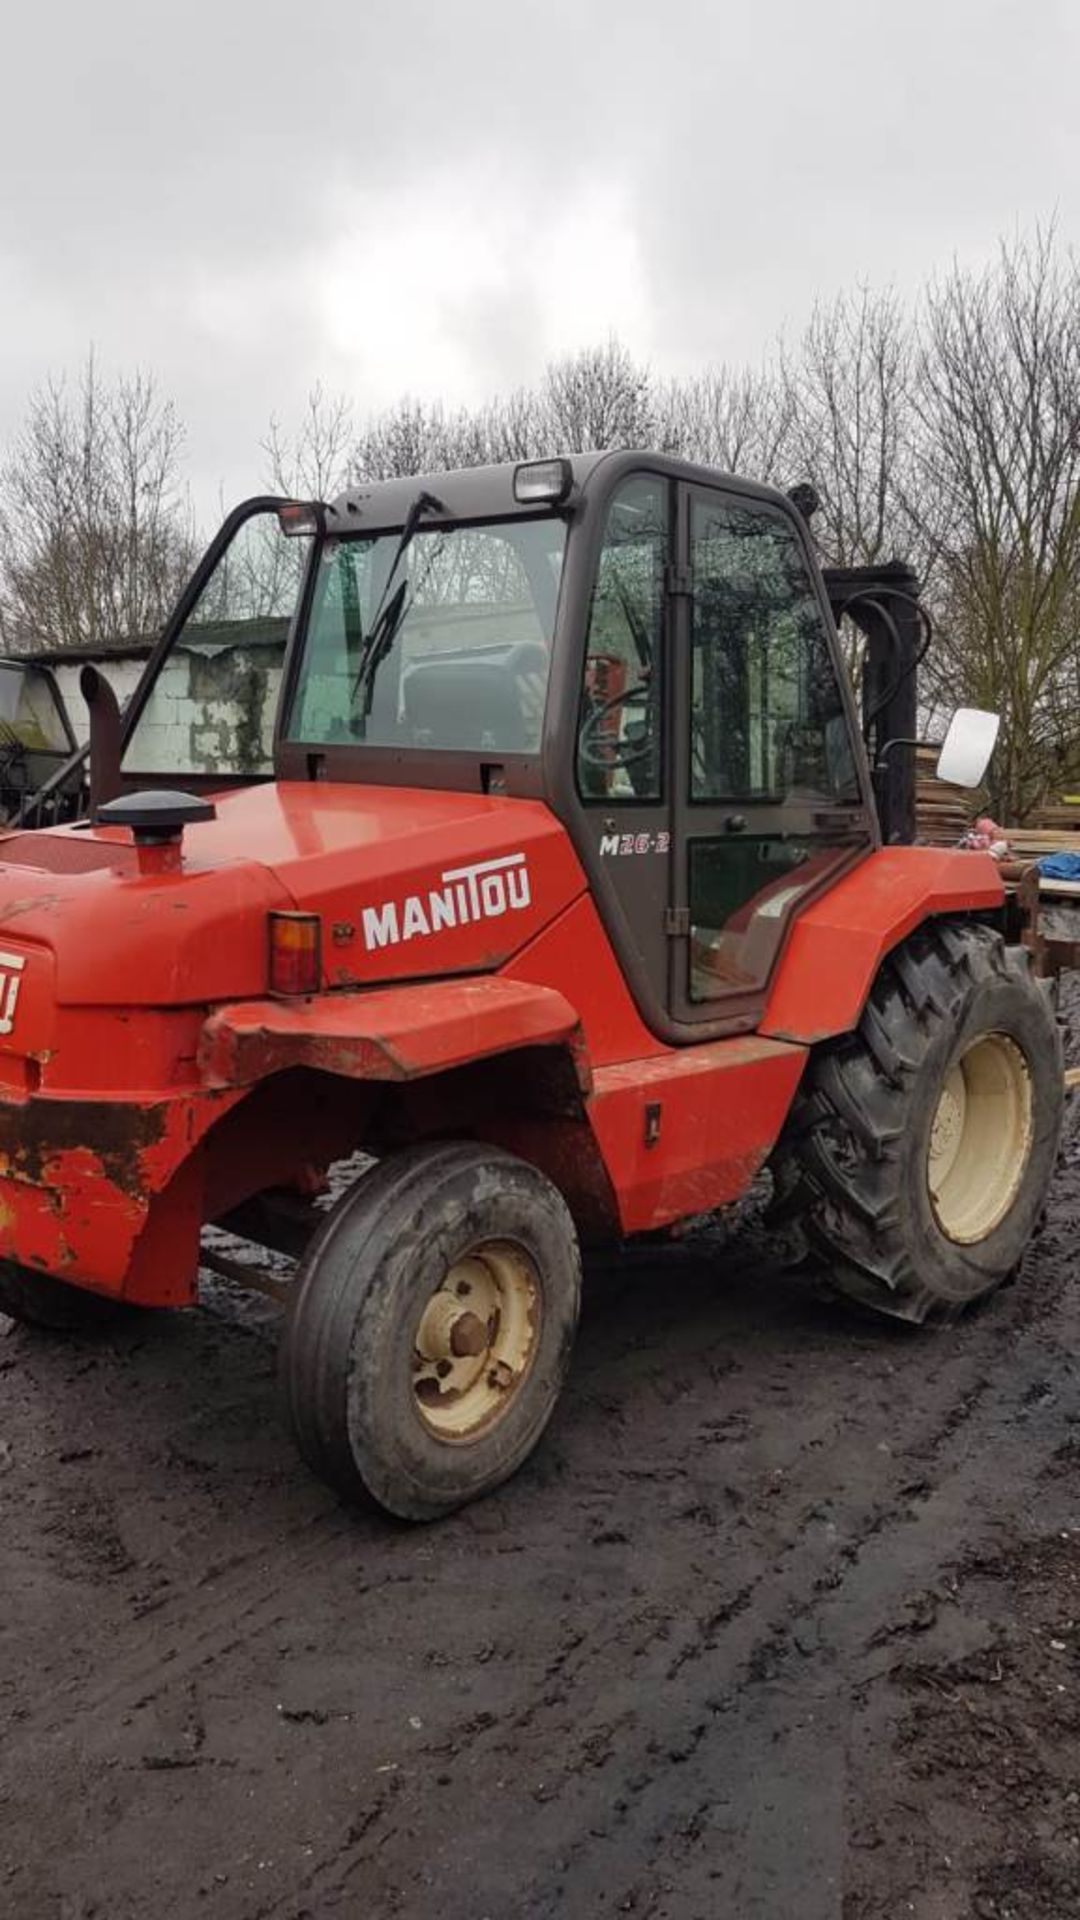 MANITOU M26 ROUGH TERRAIN FORKLIFT, YEAR 2000 BUILD, TRIPLE MAST, HYDRAULIC TIPPING ATTACHMENT AS - Image 2 of 2